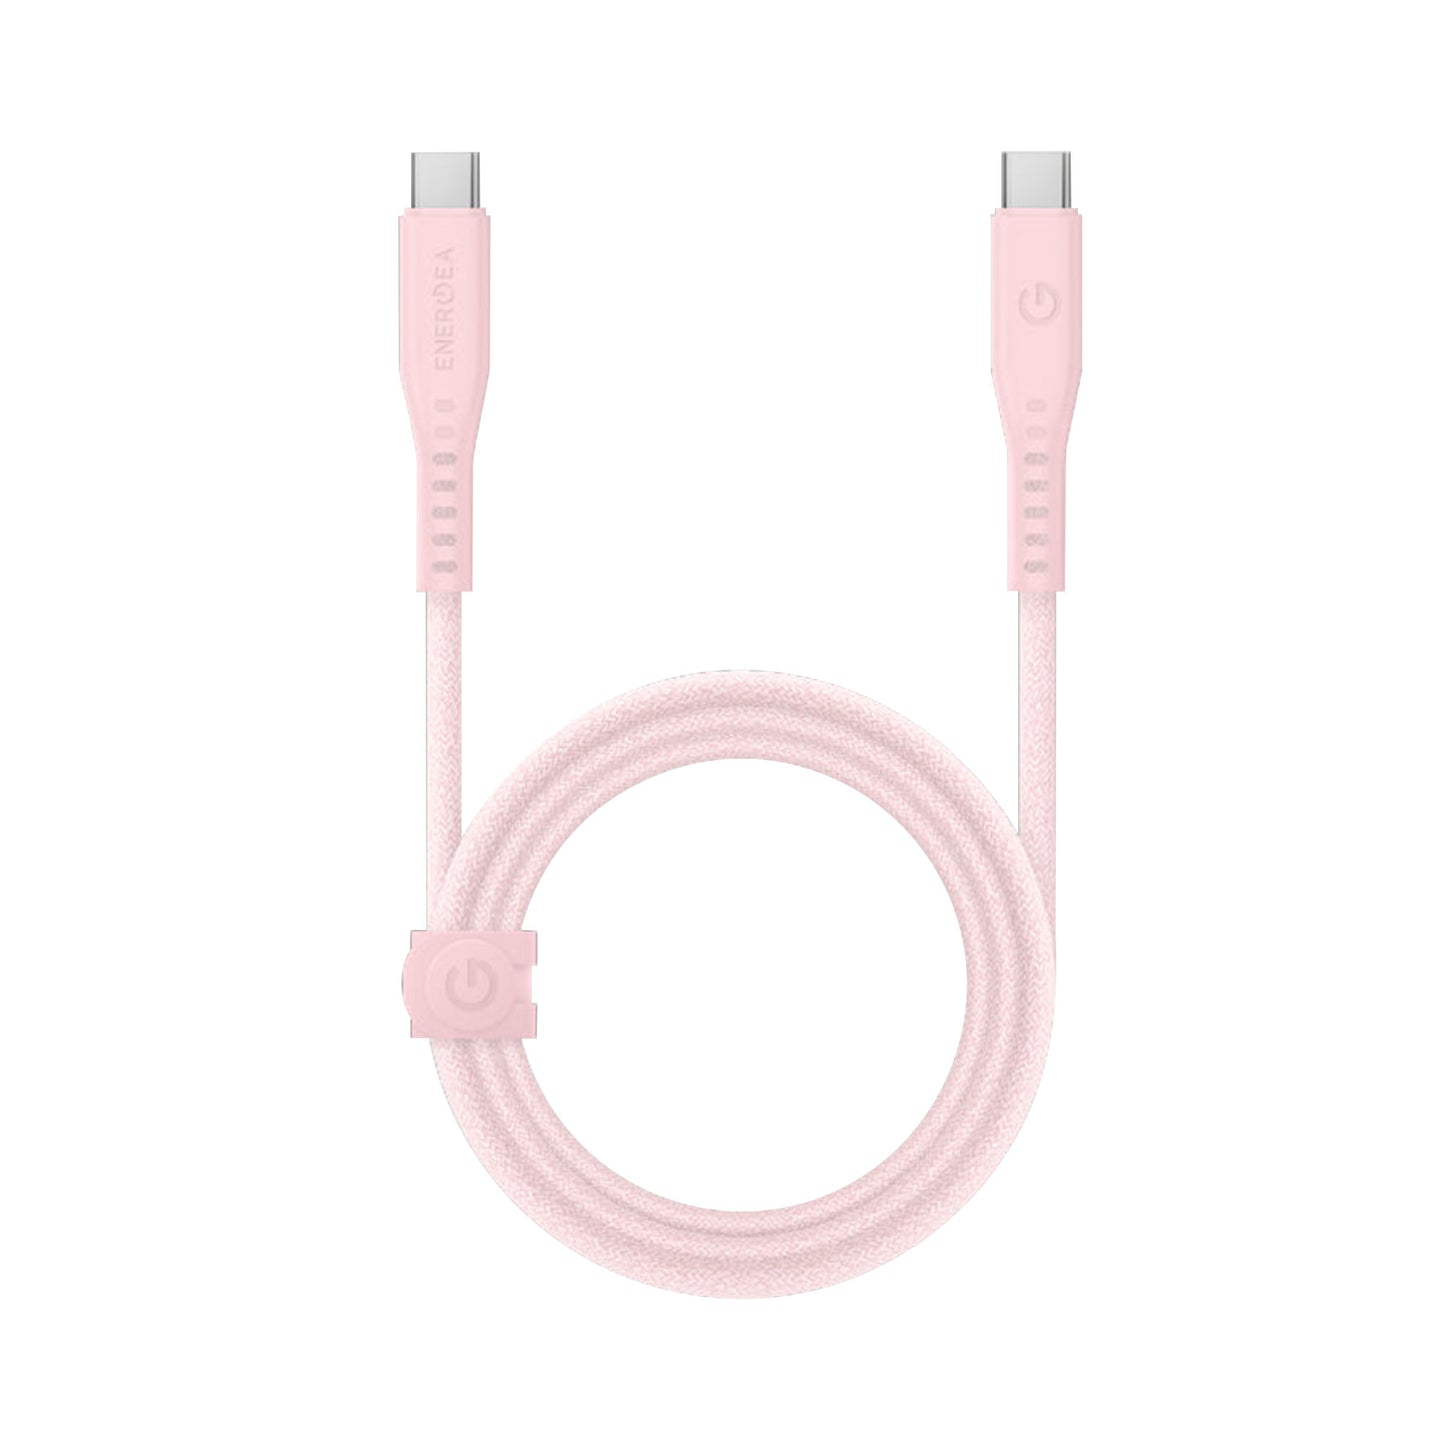 ENERGEA Flow 240w USB-C to USB-C PD Fast Charging Cable 1.5m - Pink